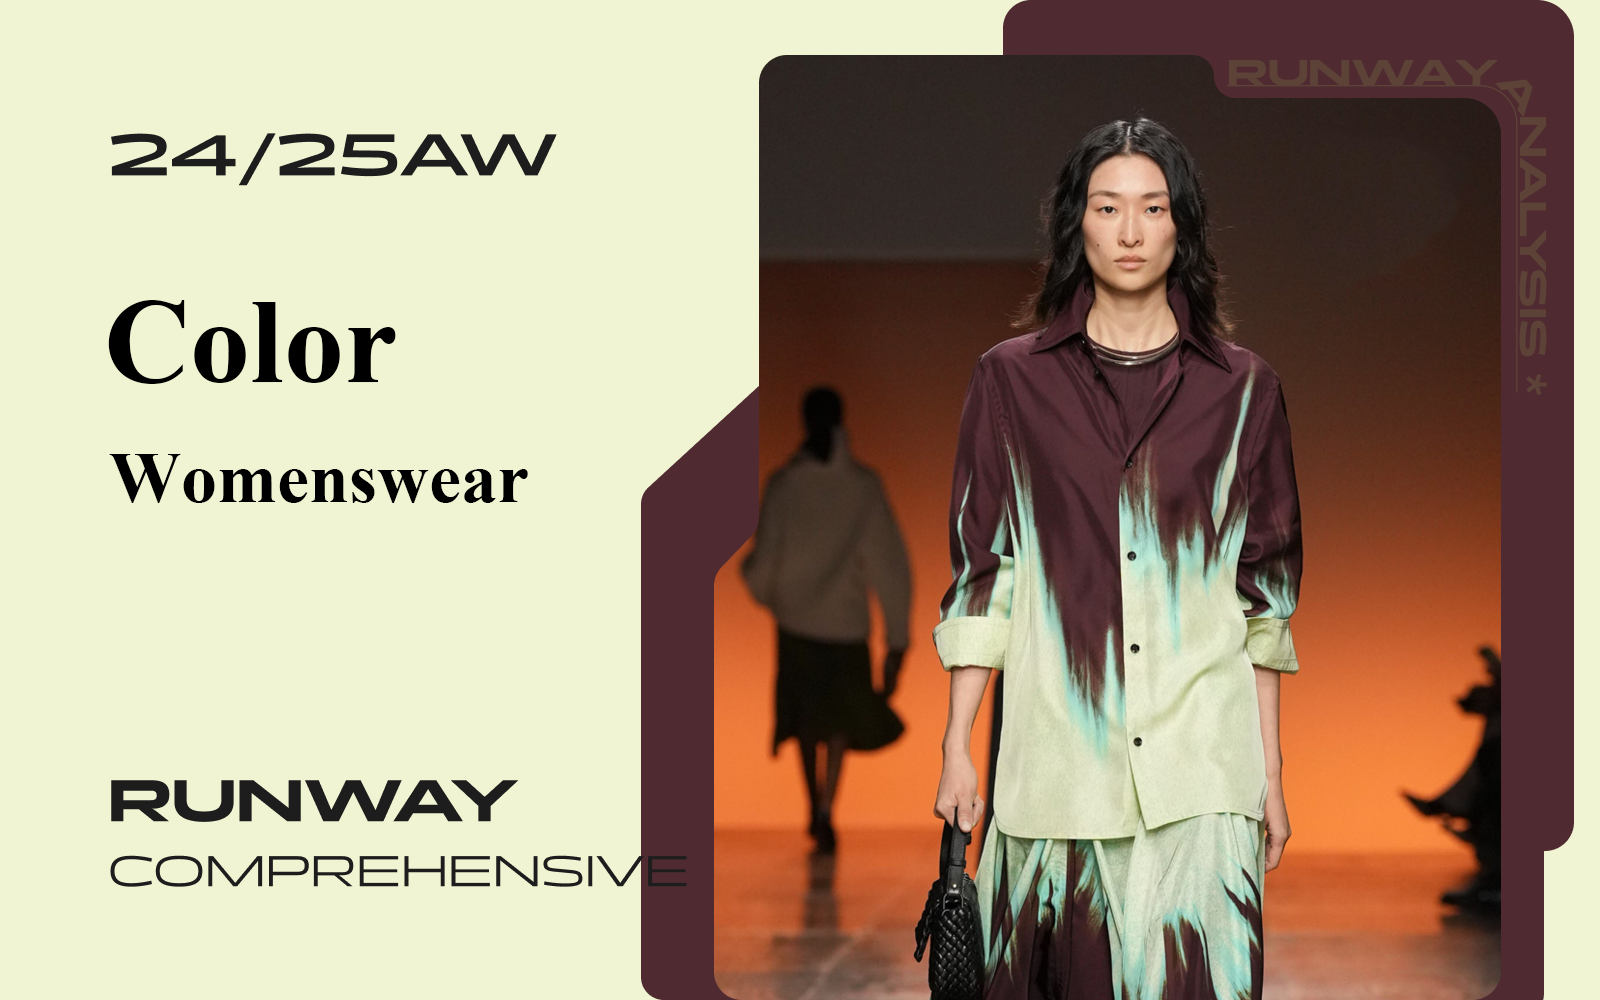 Chromatic -- The Comprehensive Analysis of A/W 24/25 Women's Runway